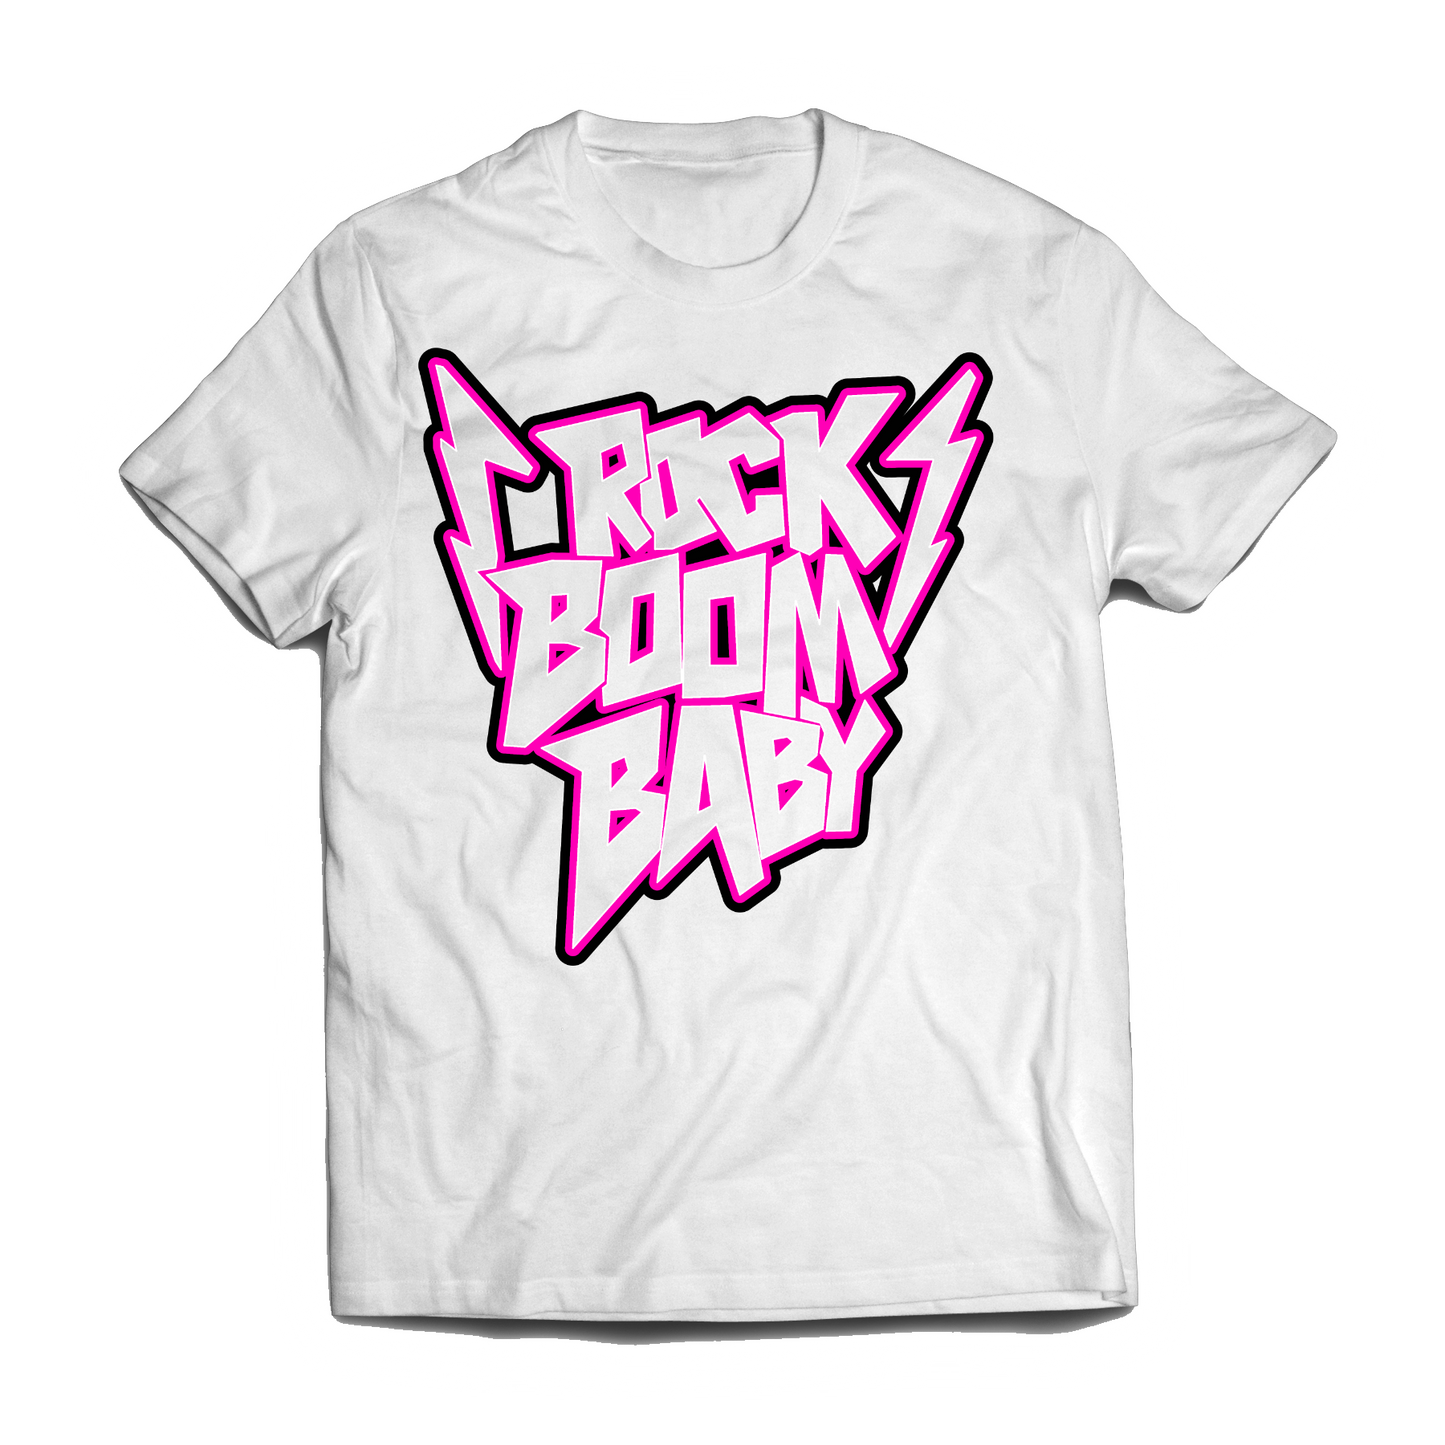 ROCK BOOM BABY TEE ~ WHITE & PINK